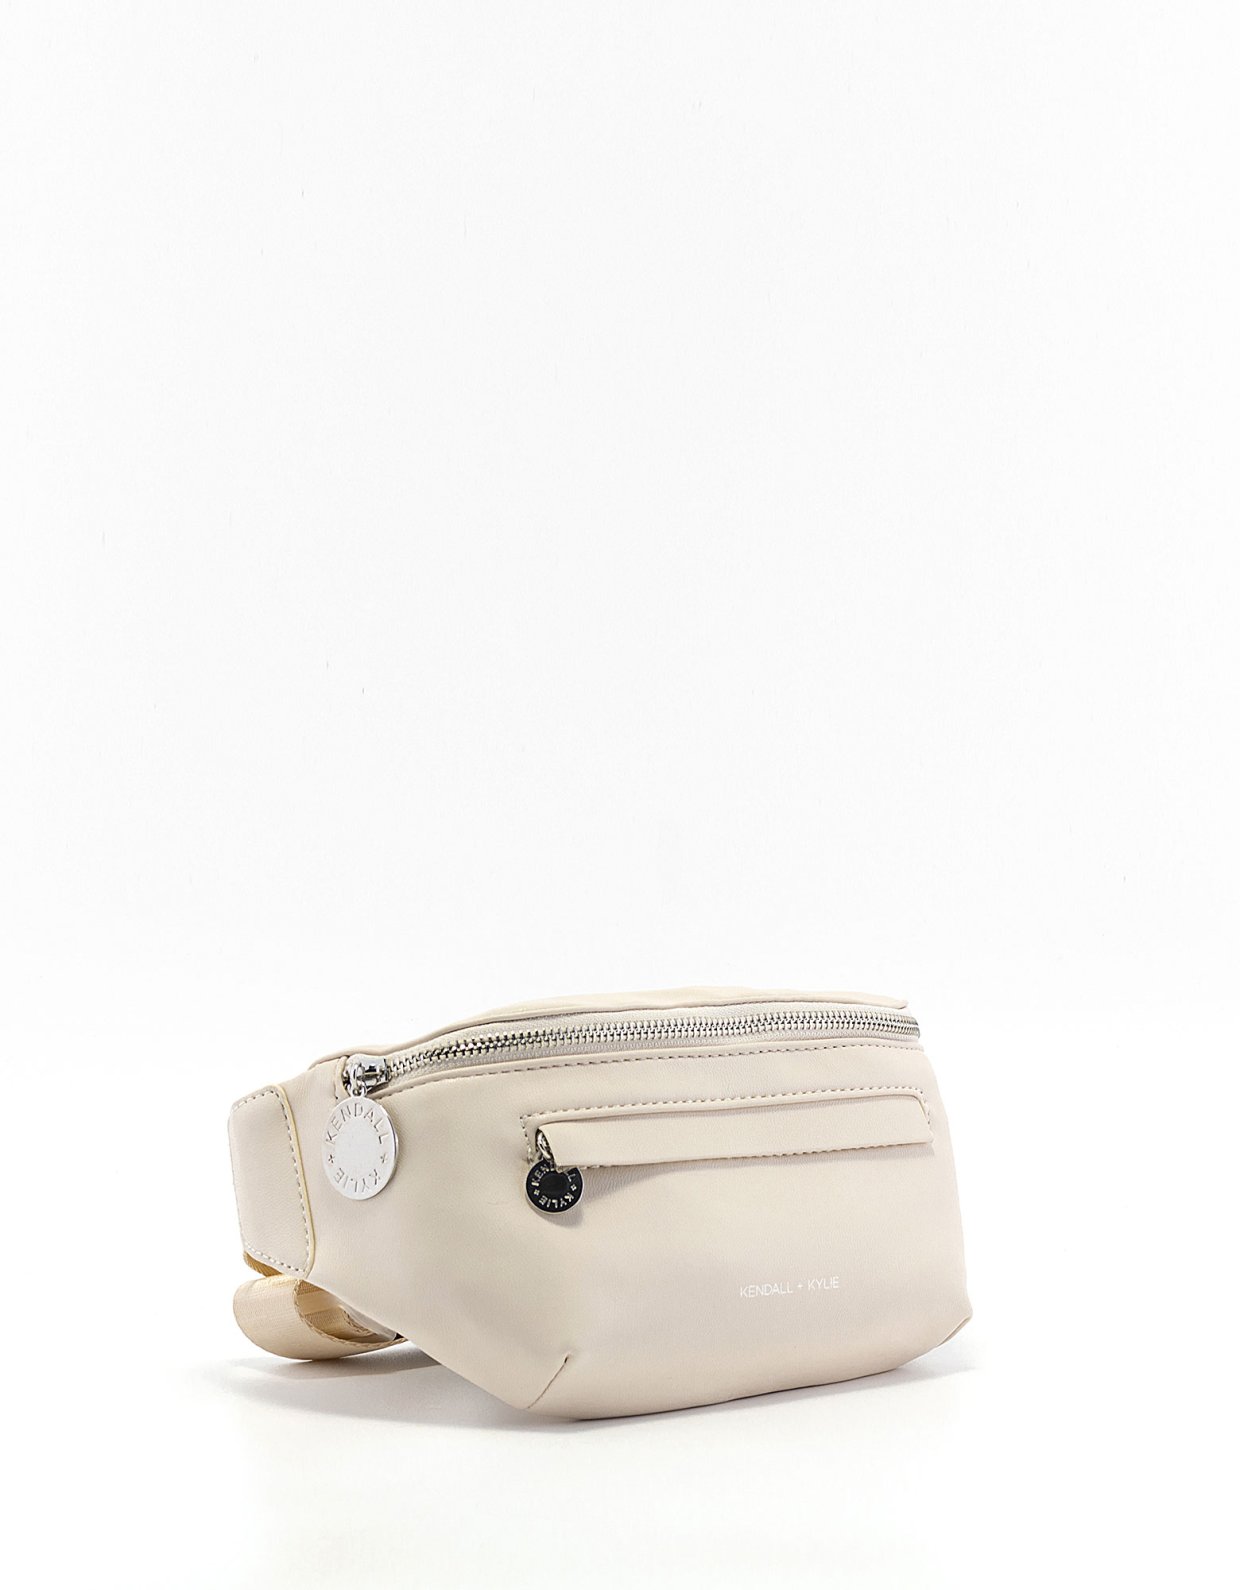 Kendall + Kylie Nora fanny pack off white